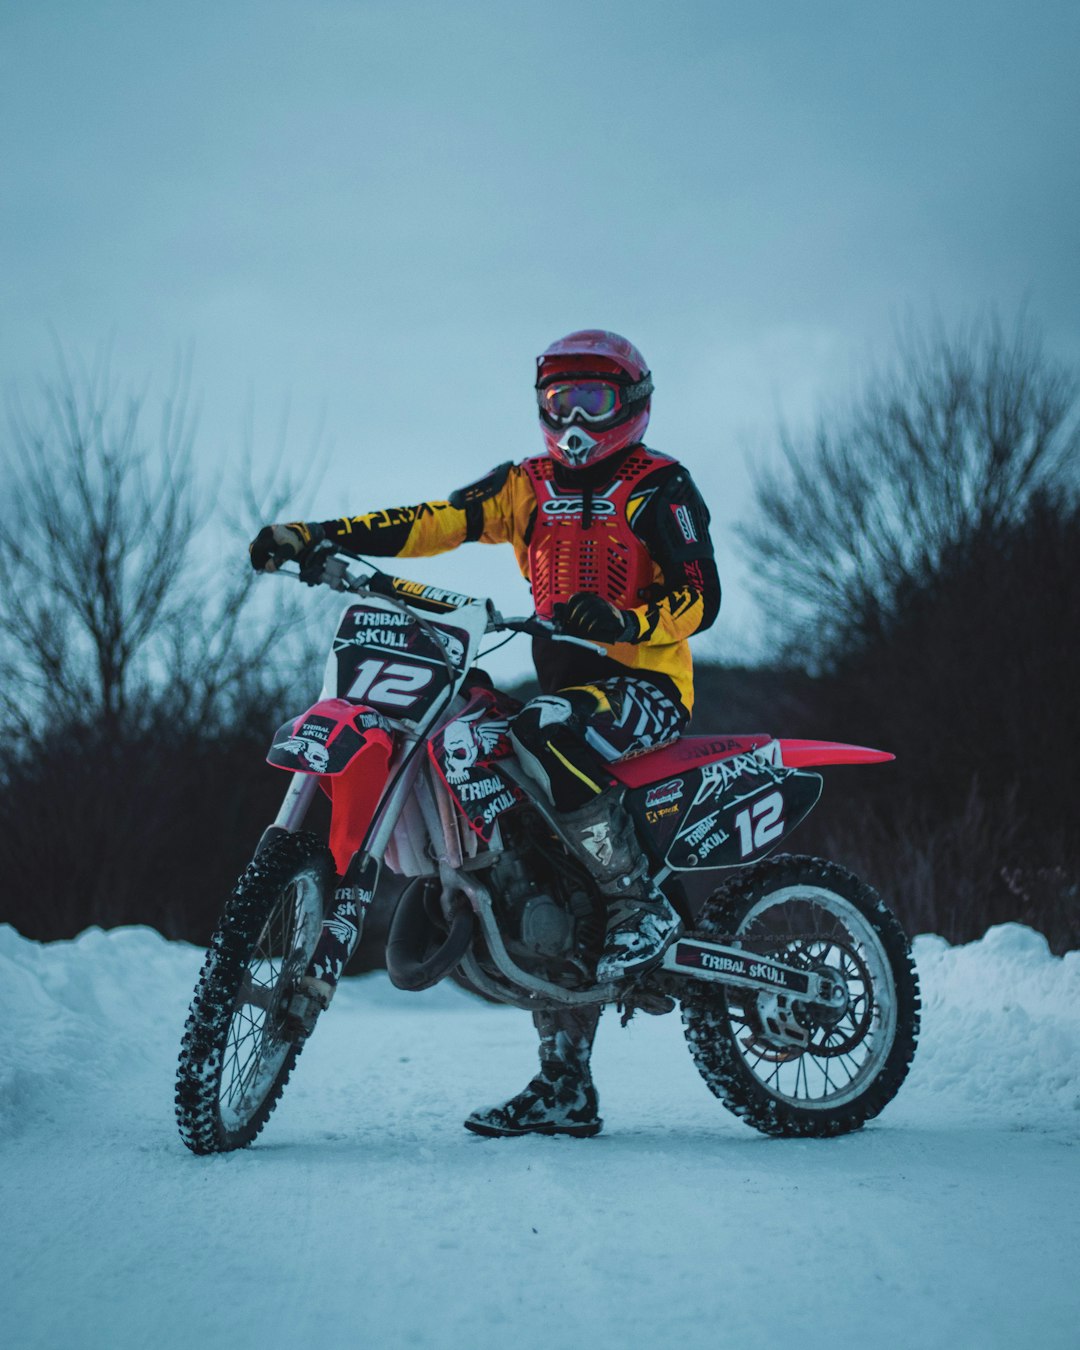 man in red and black motocross suit riding motocross dirt bike on snow covered ground during